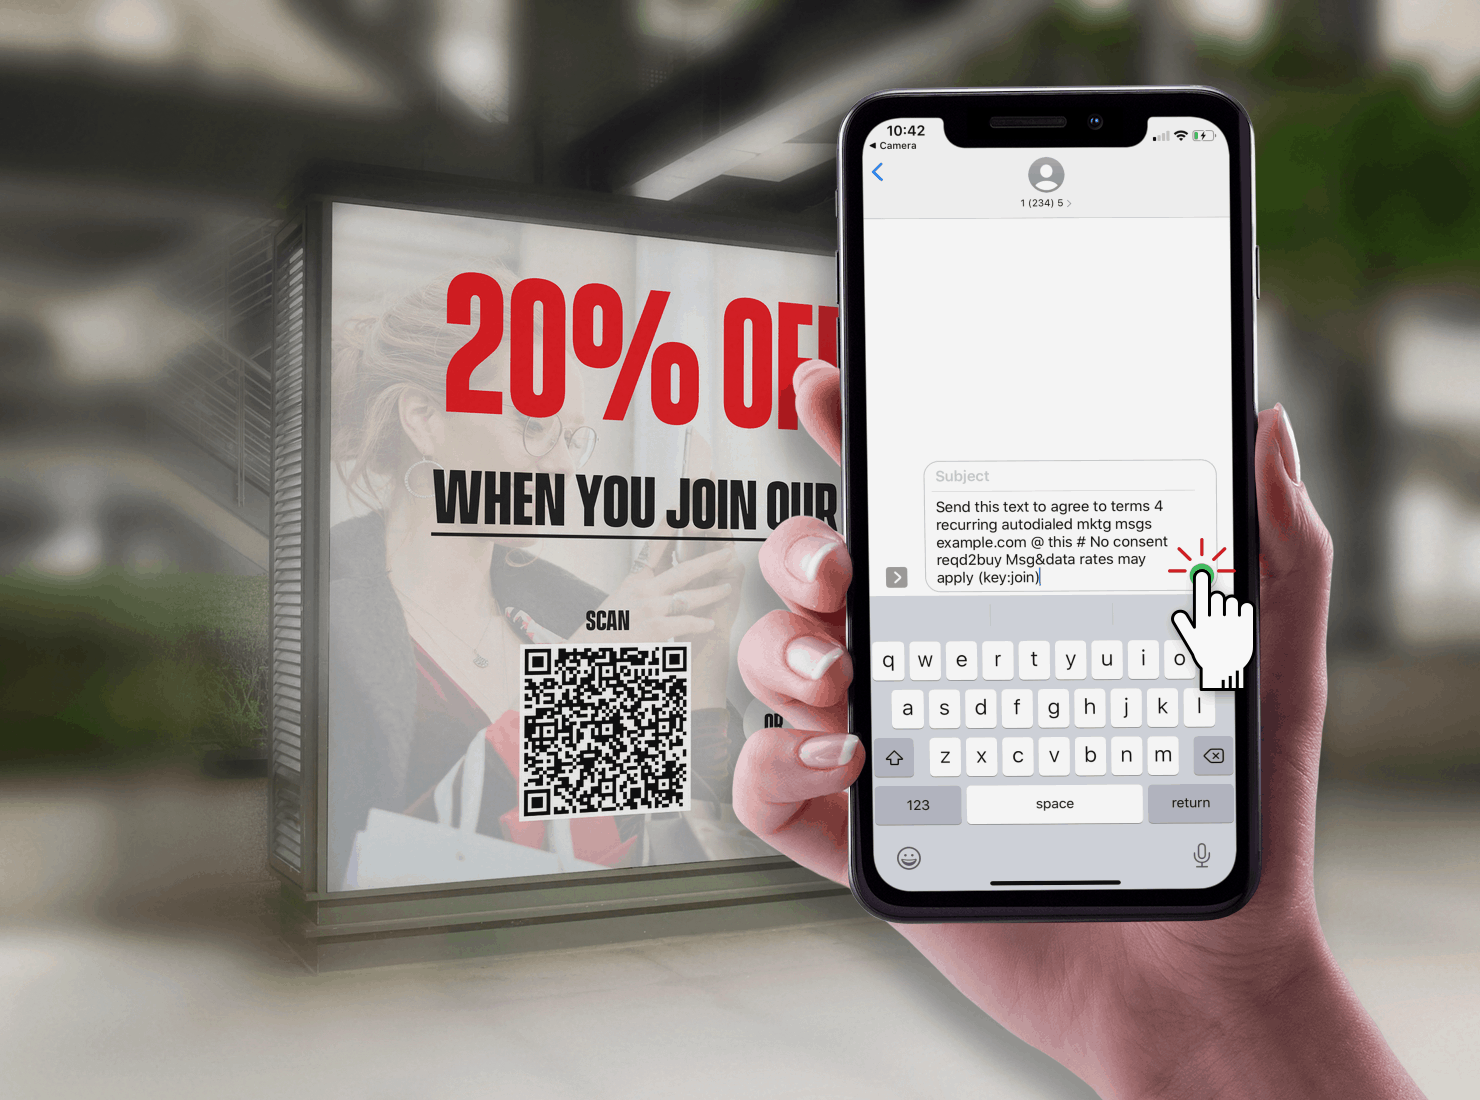 SMS Marketing with QR Codes - Step 5 Send Opt-In Text Message